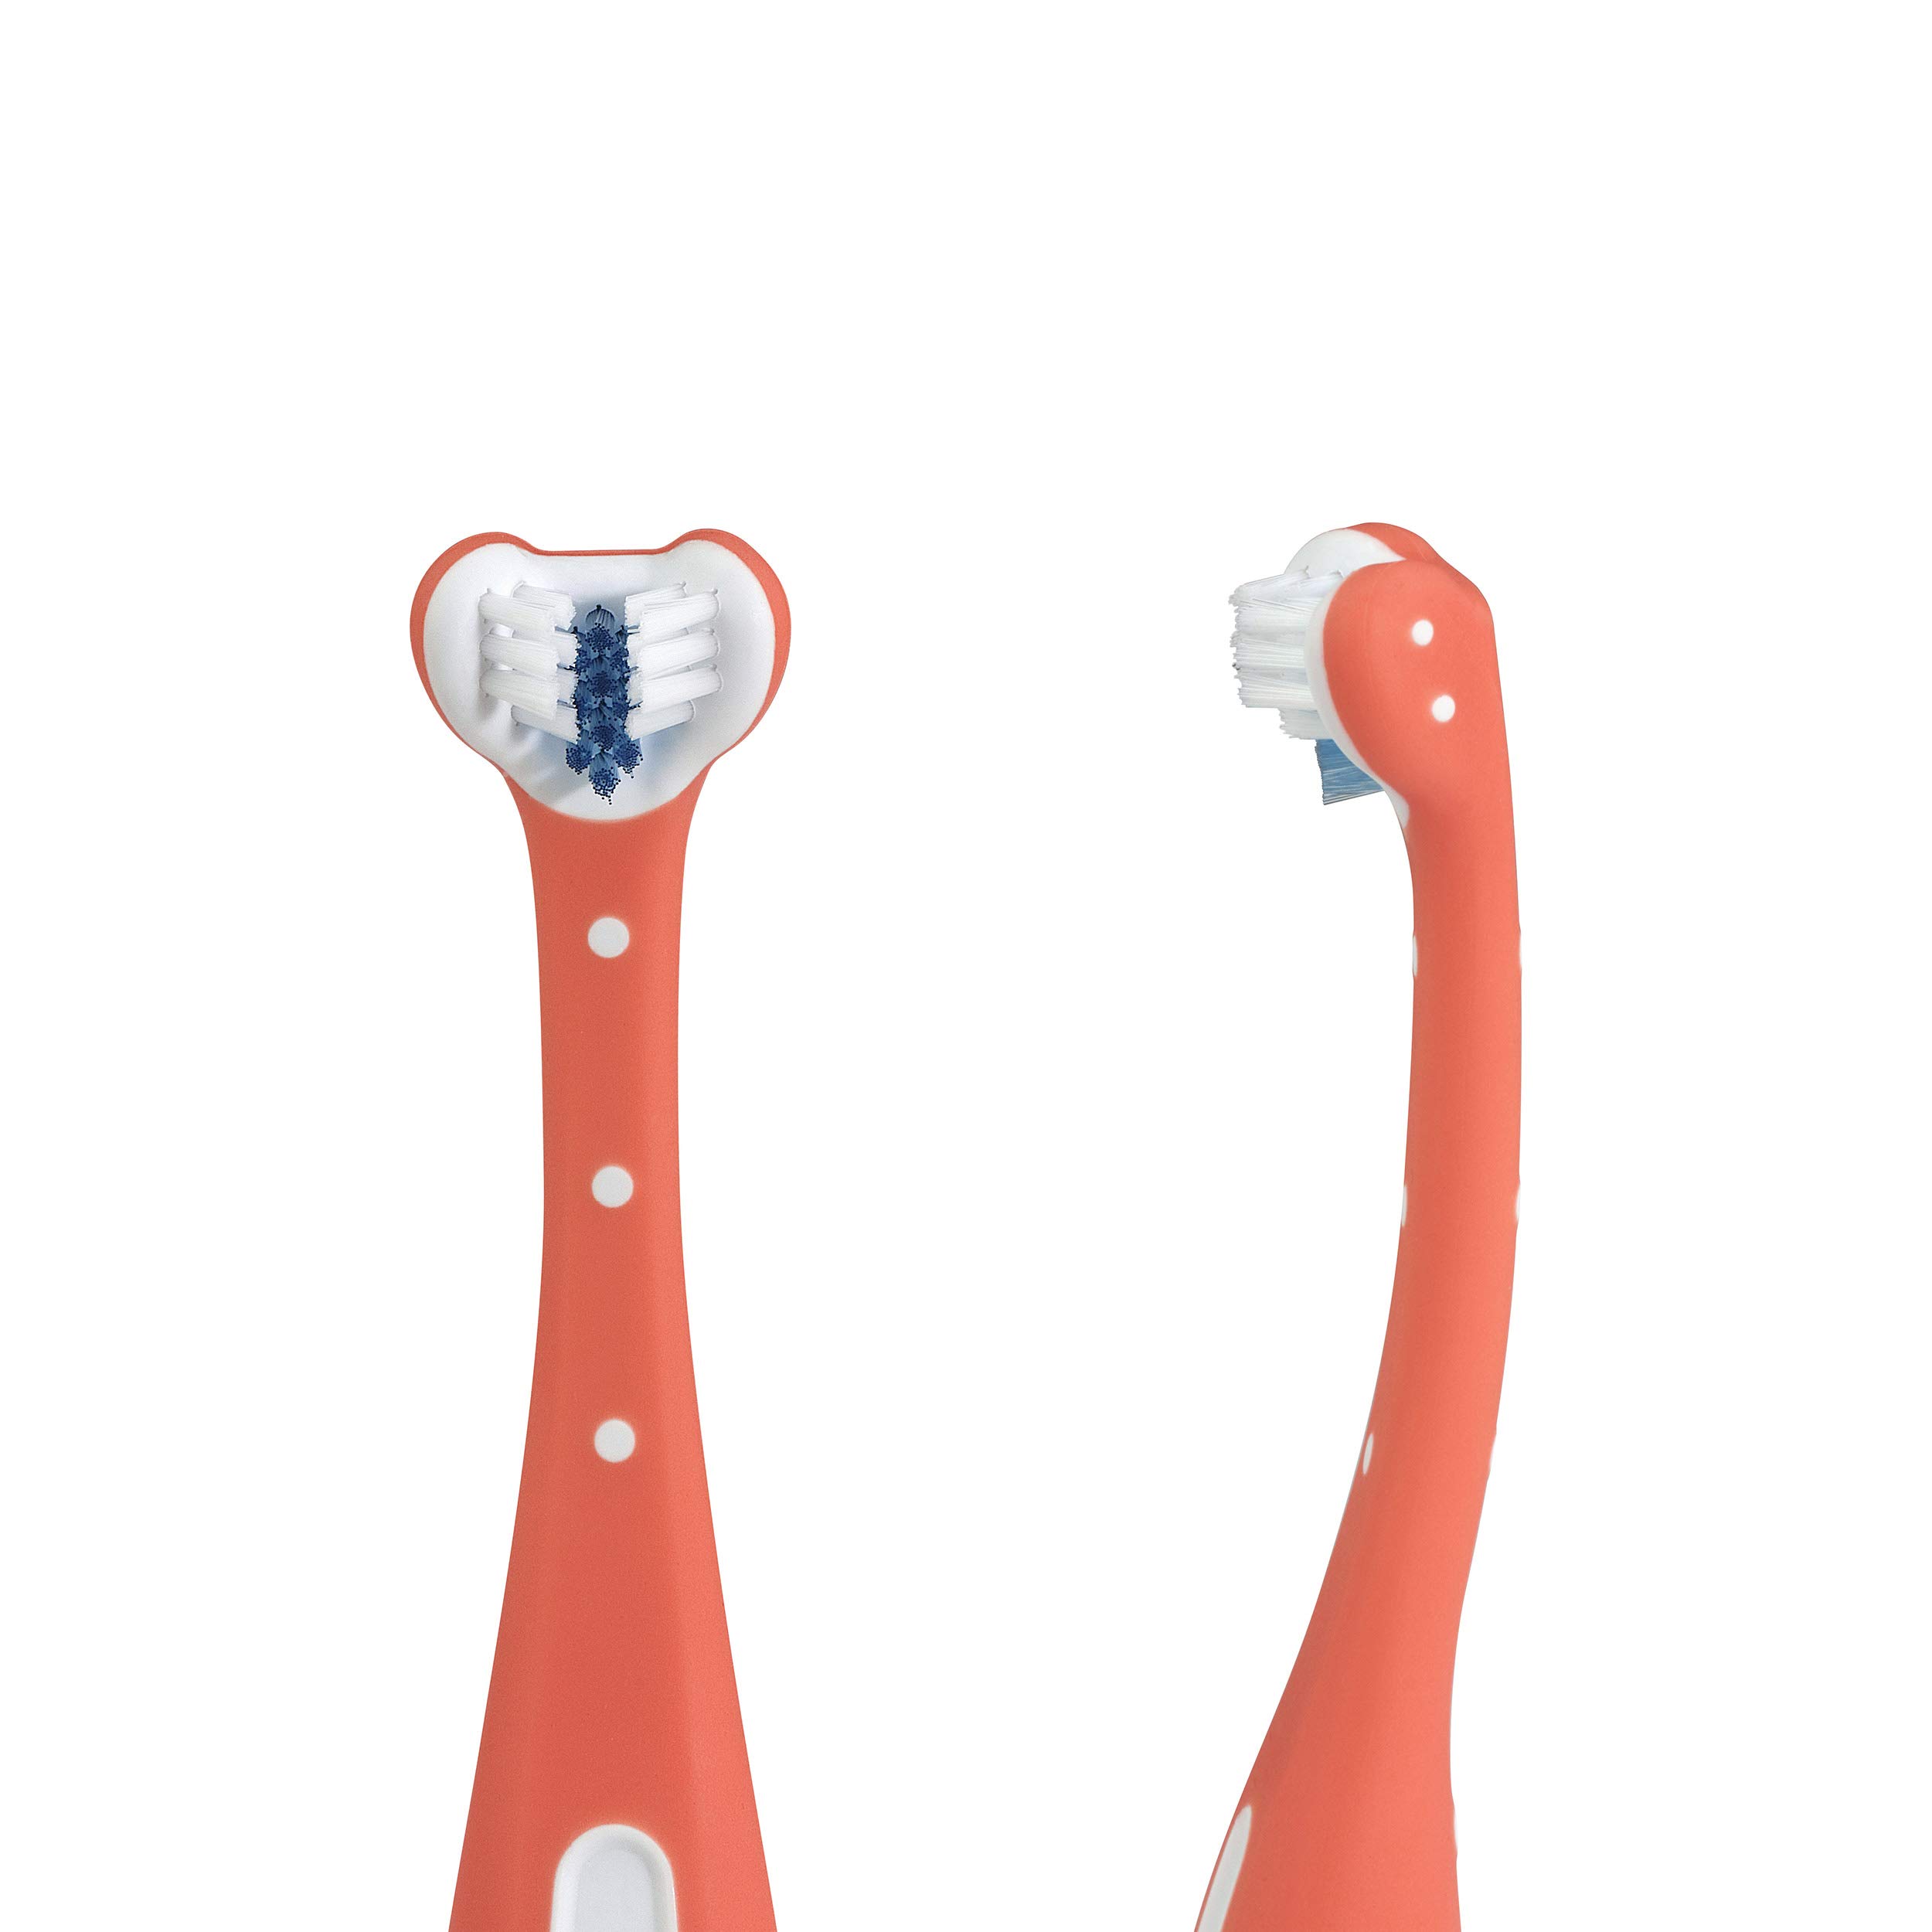 Frida Baby Triple-Angle Toothhugger Training Toothbrush for Toddler Oral Care